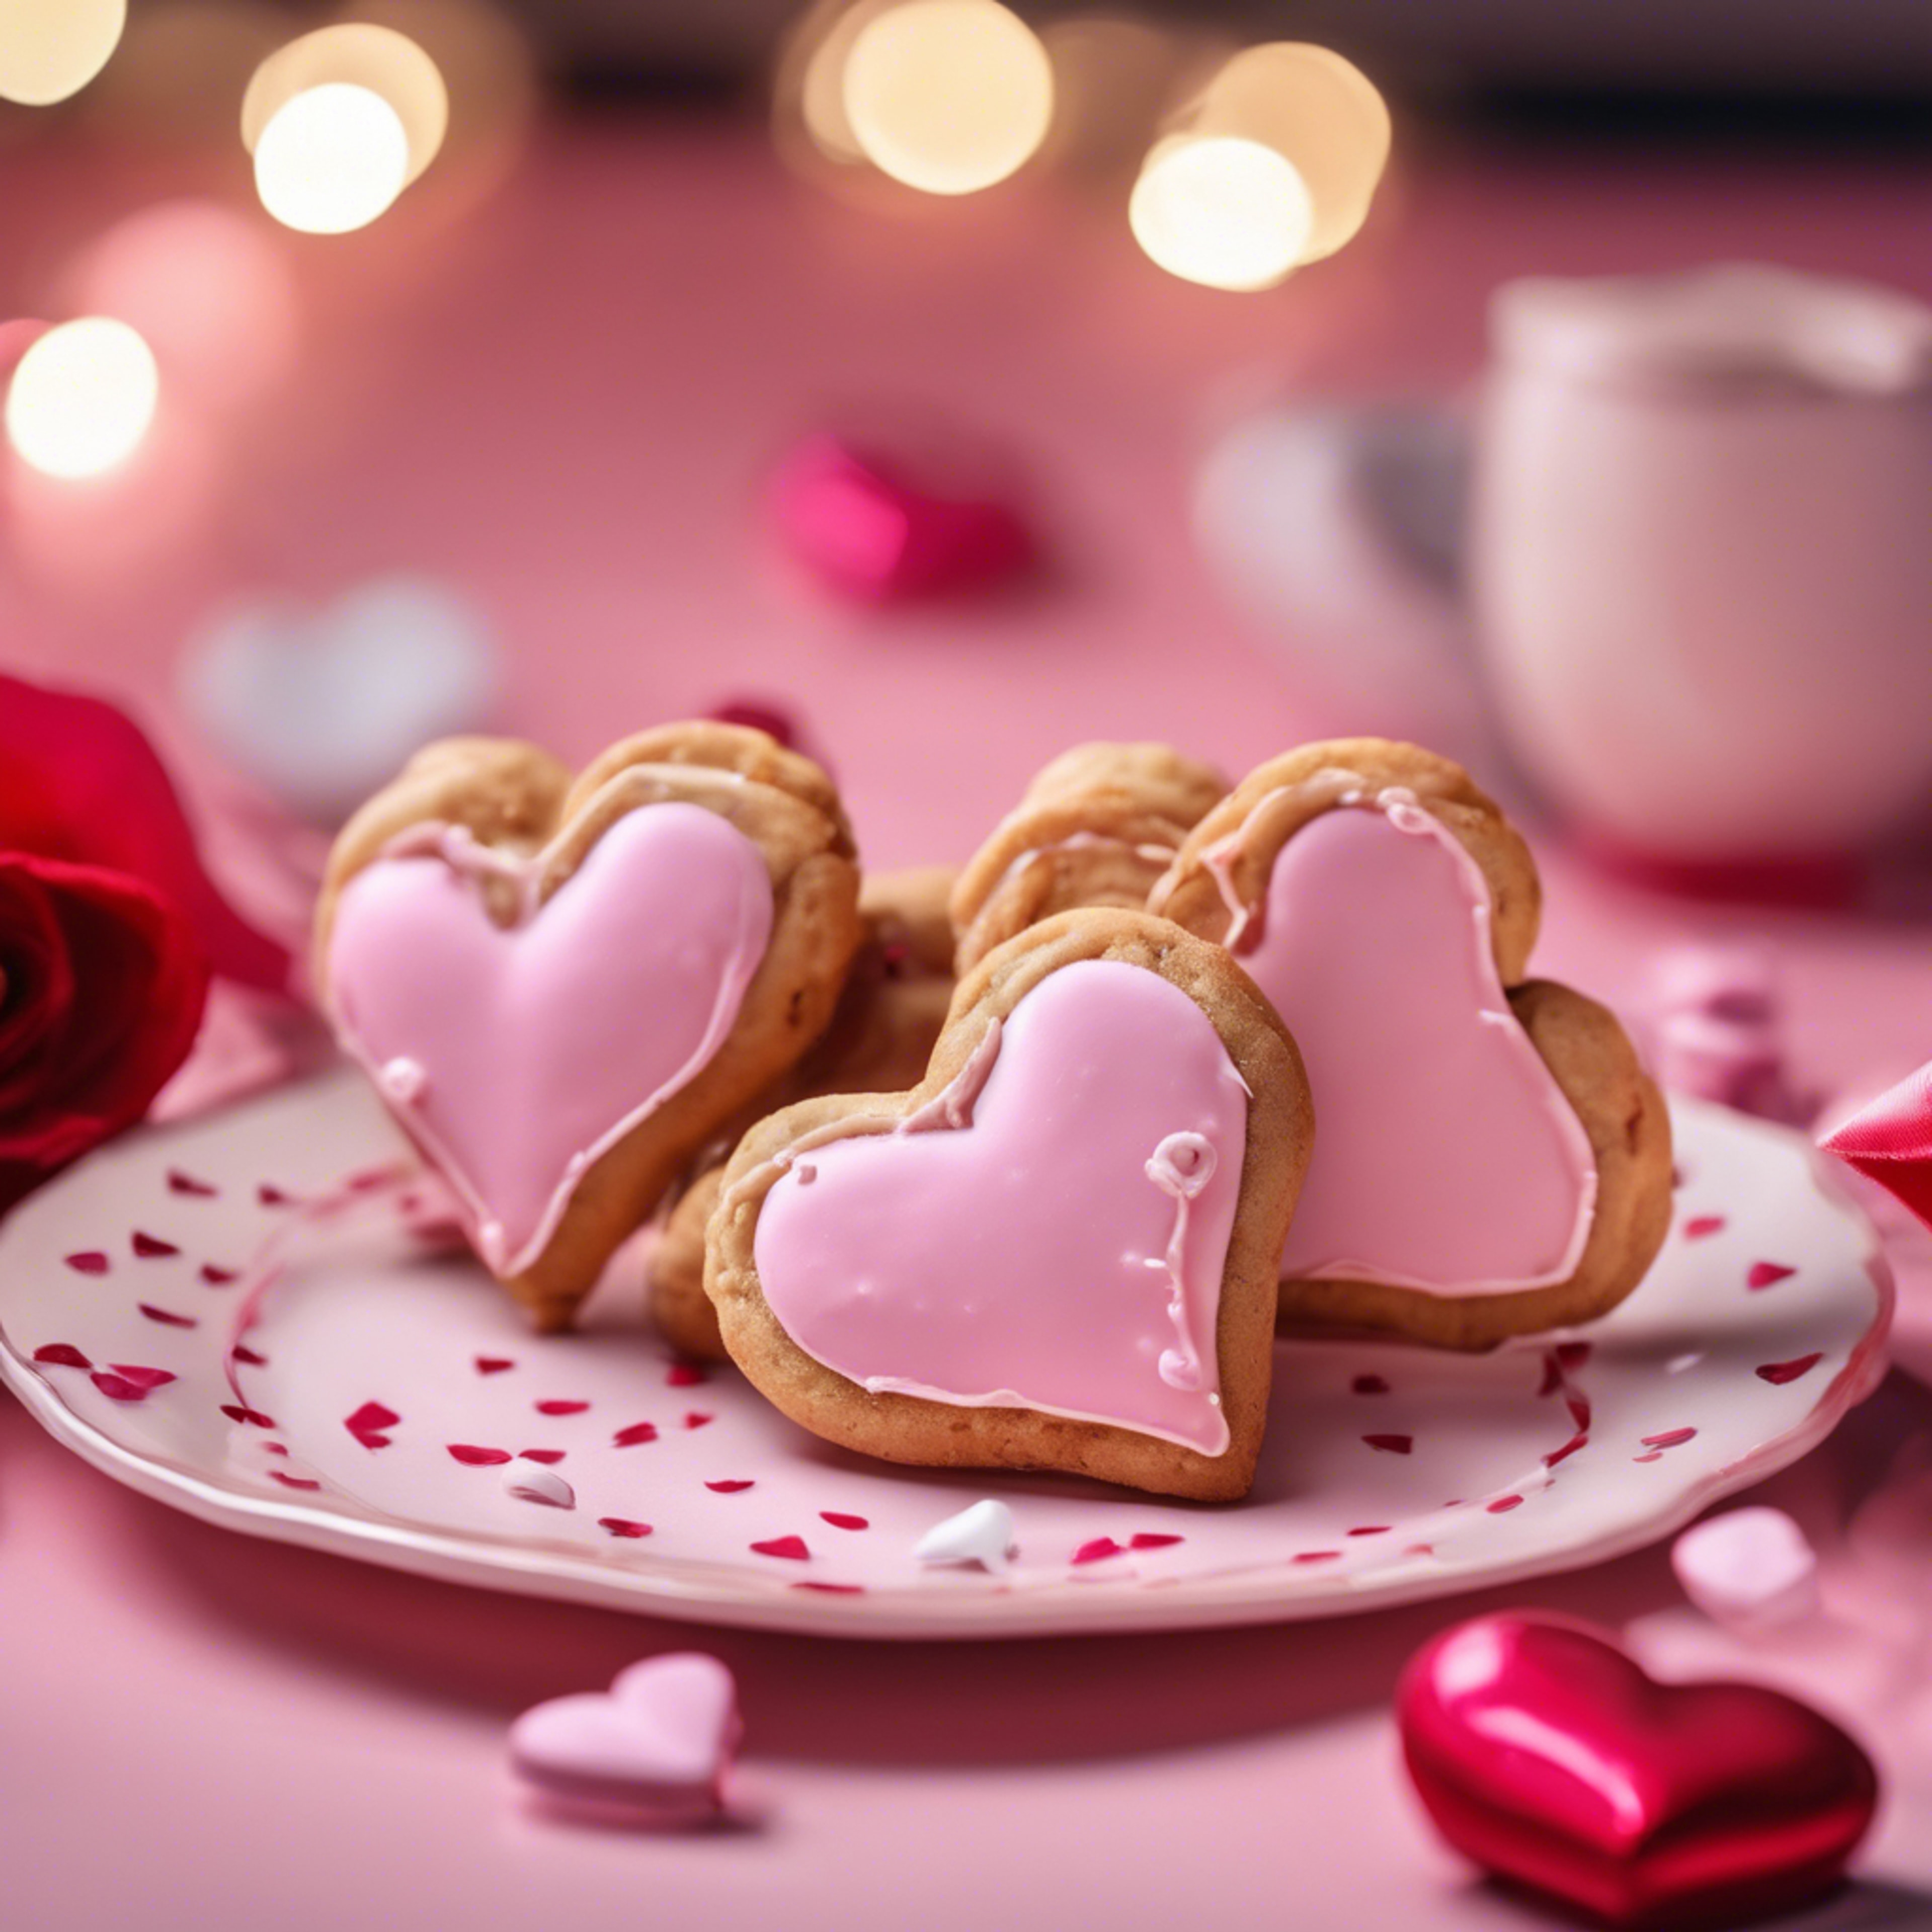 A pair of heart-shaped frosted cookies on a vibrant Valentine's day setting. วอลล์เปเปอร์[699c1bd667c44183af85]